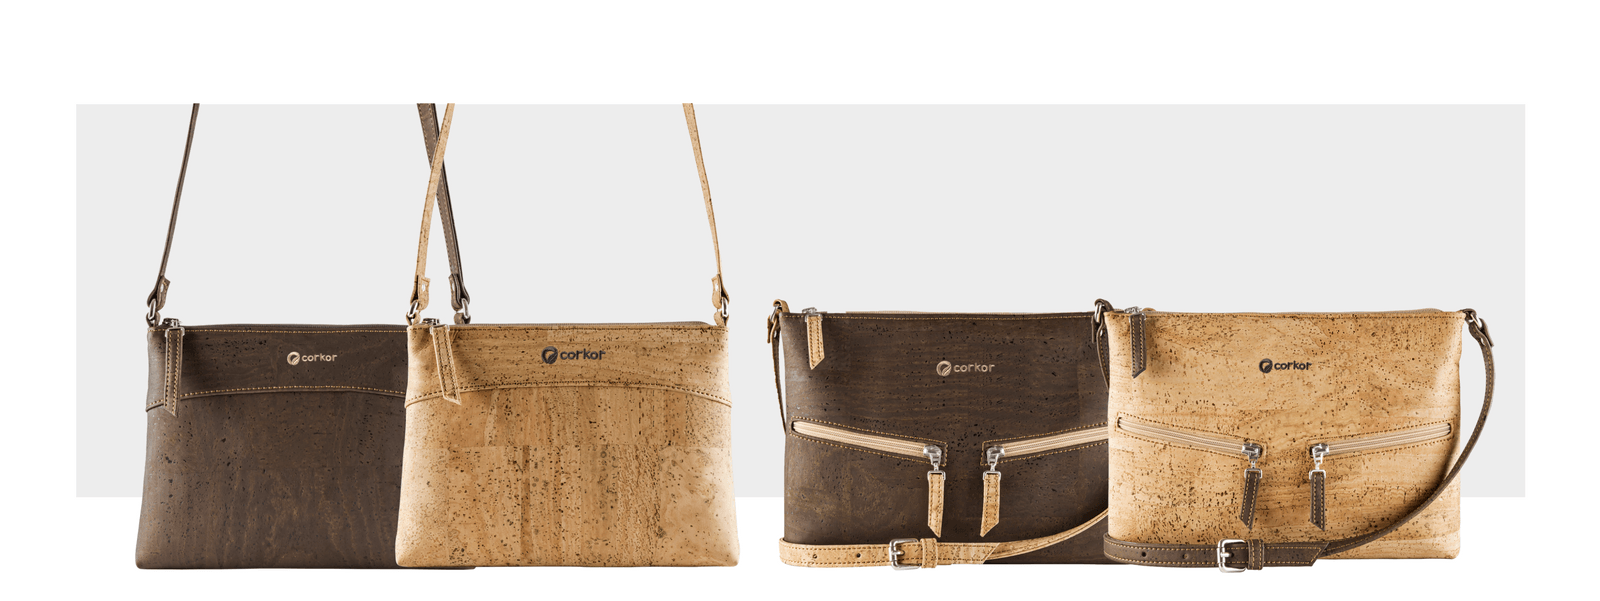 Crossbody Bags Were Made to Have Fun in The Sun | Corkor